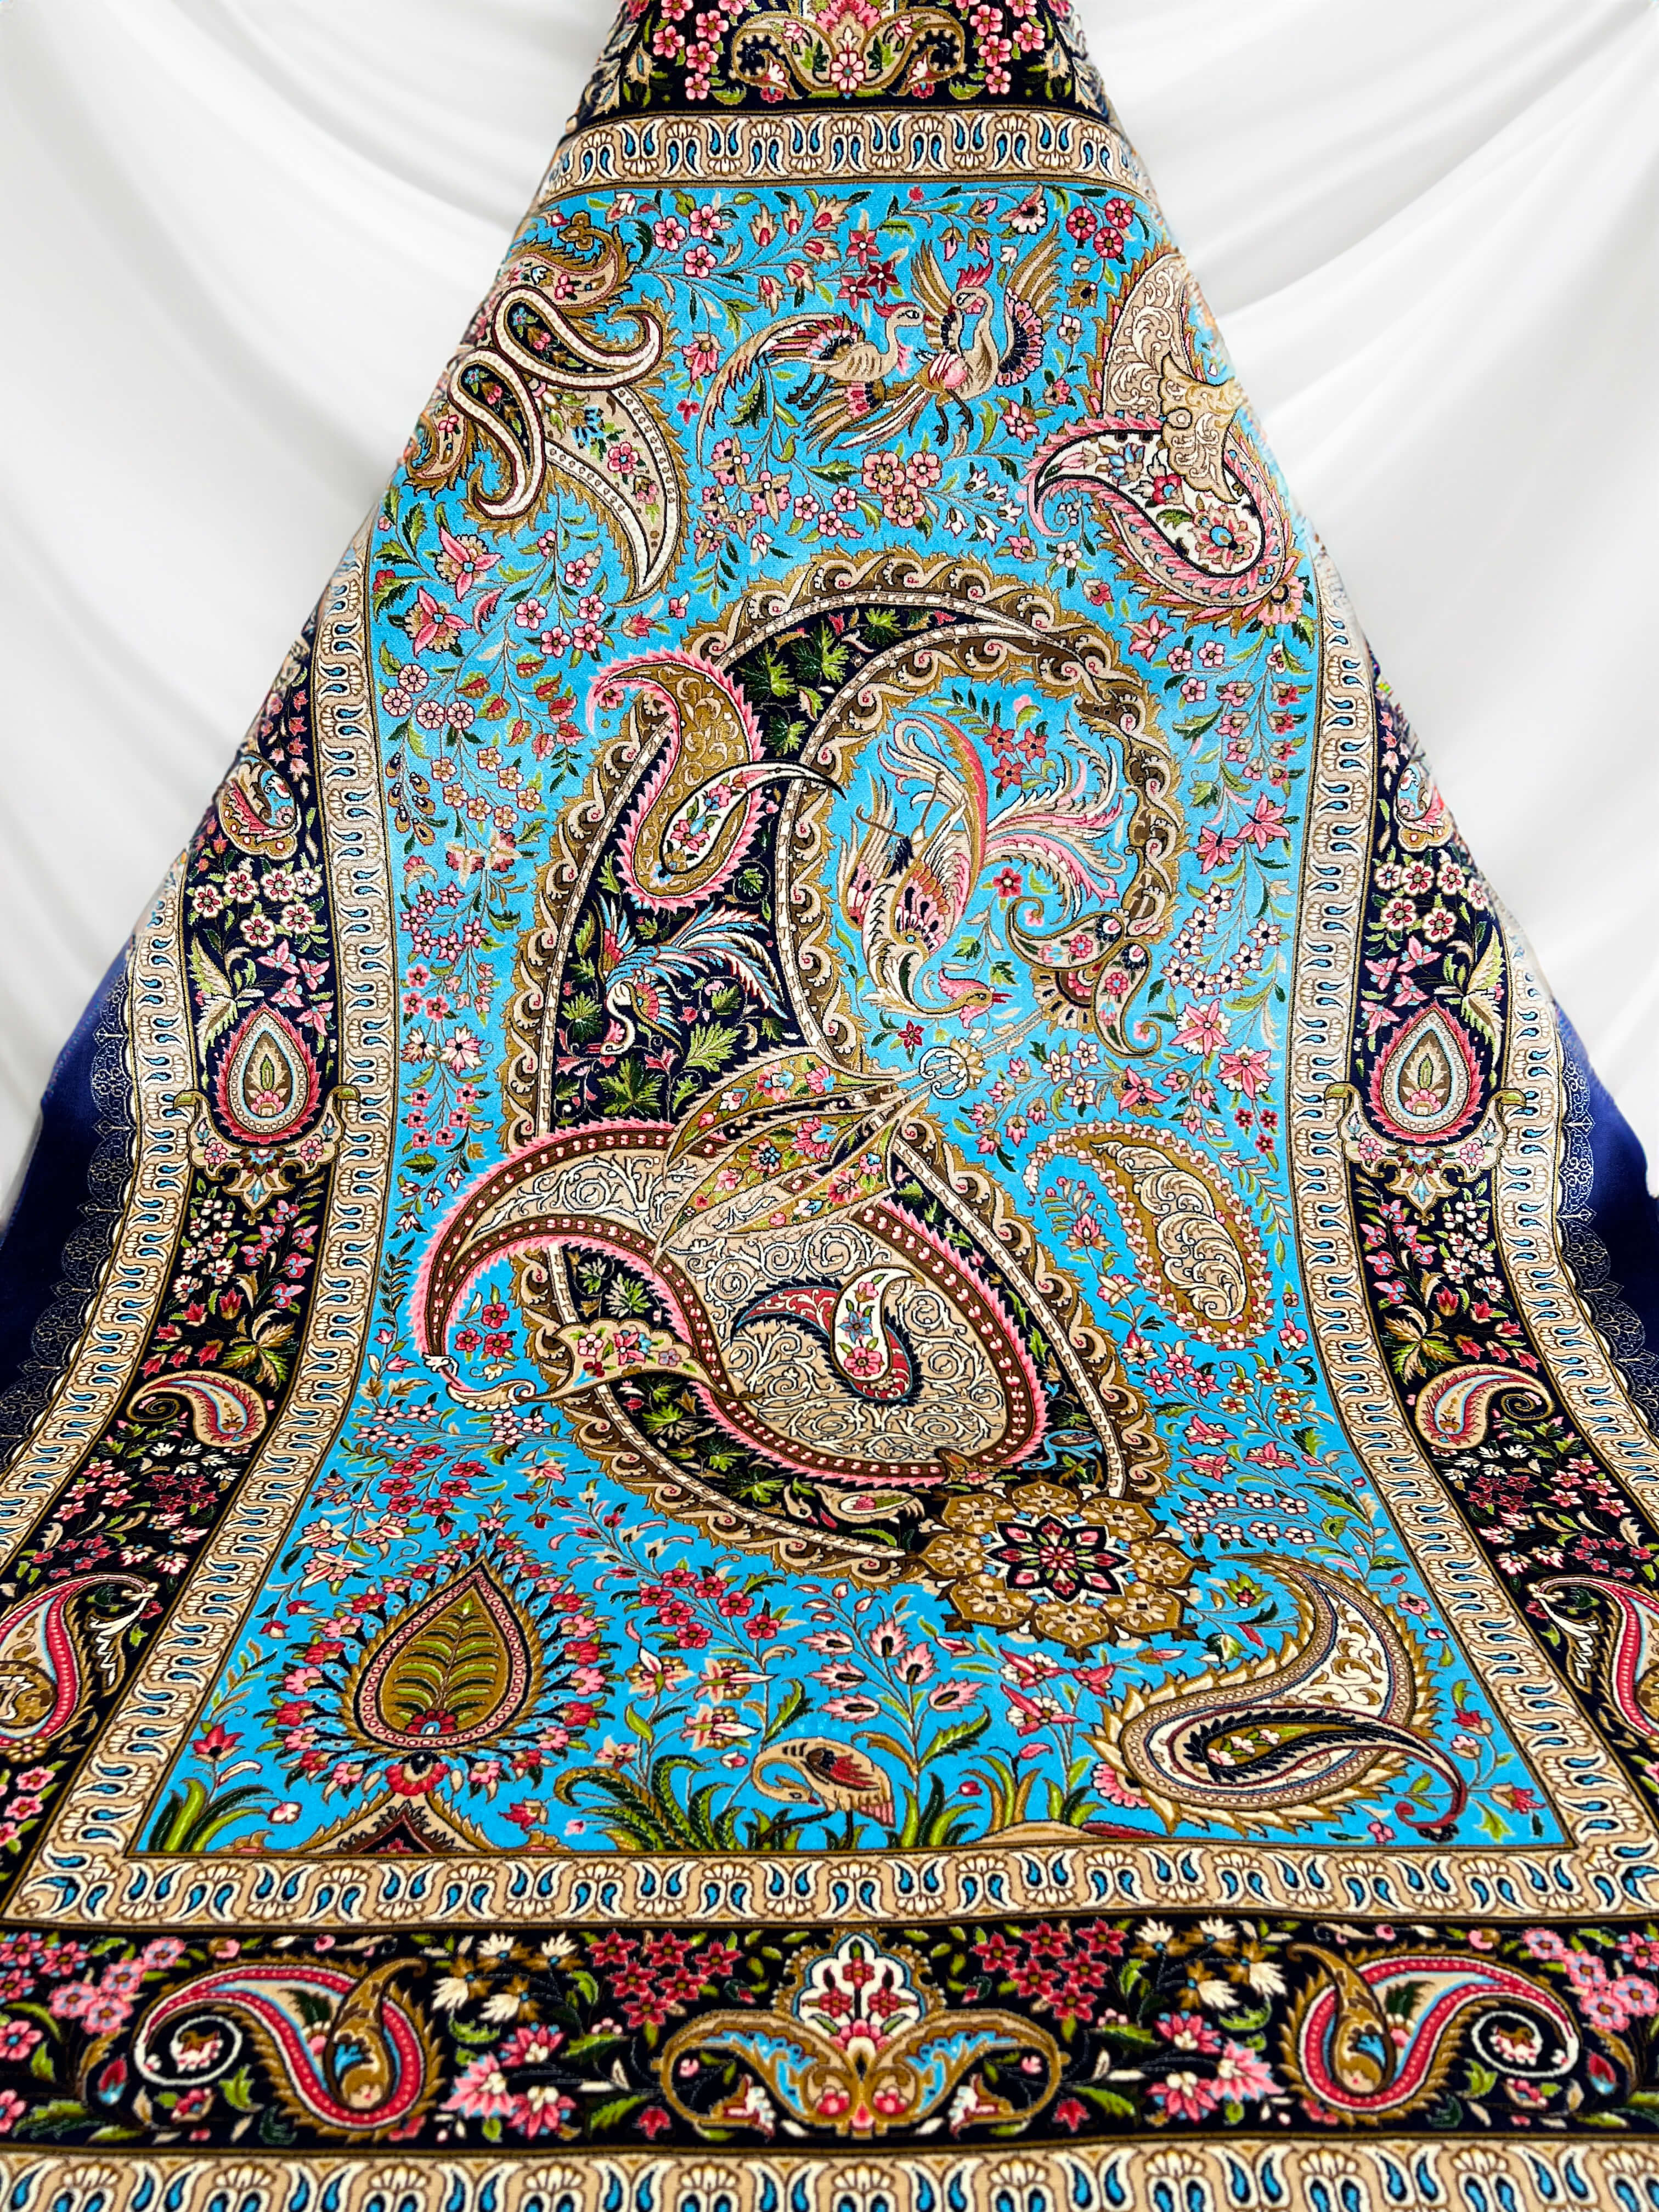 Overall view of the Blue Turquoise Paisley Boteh Silk Rug, highlighting its contrasting hues